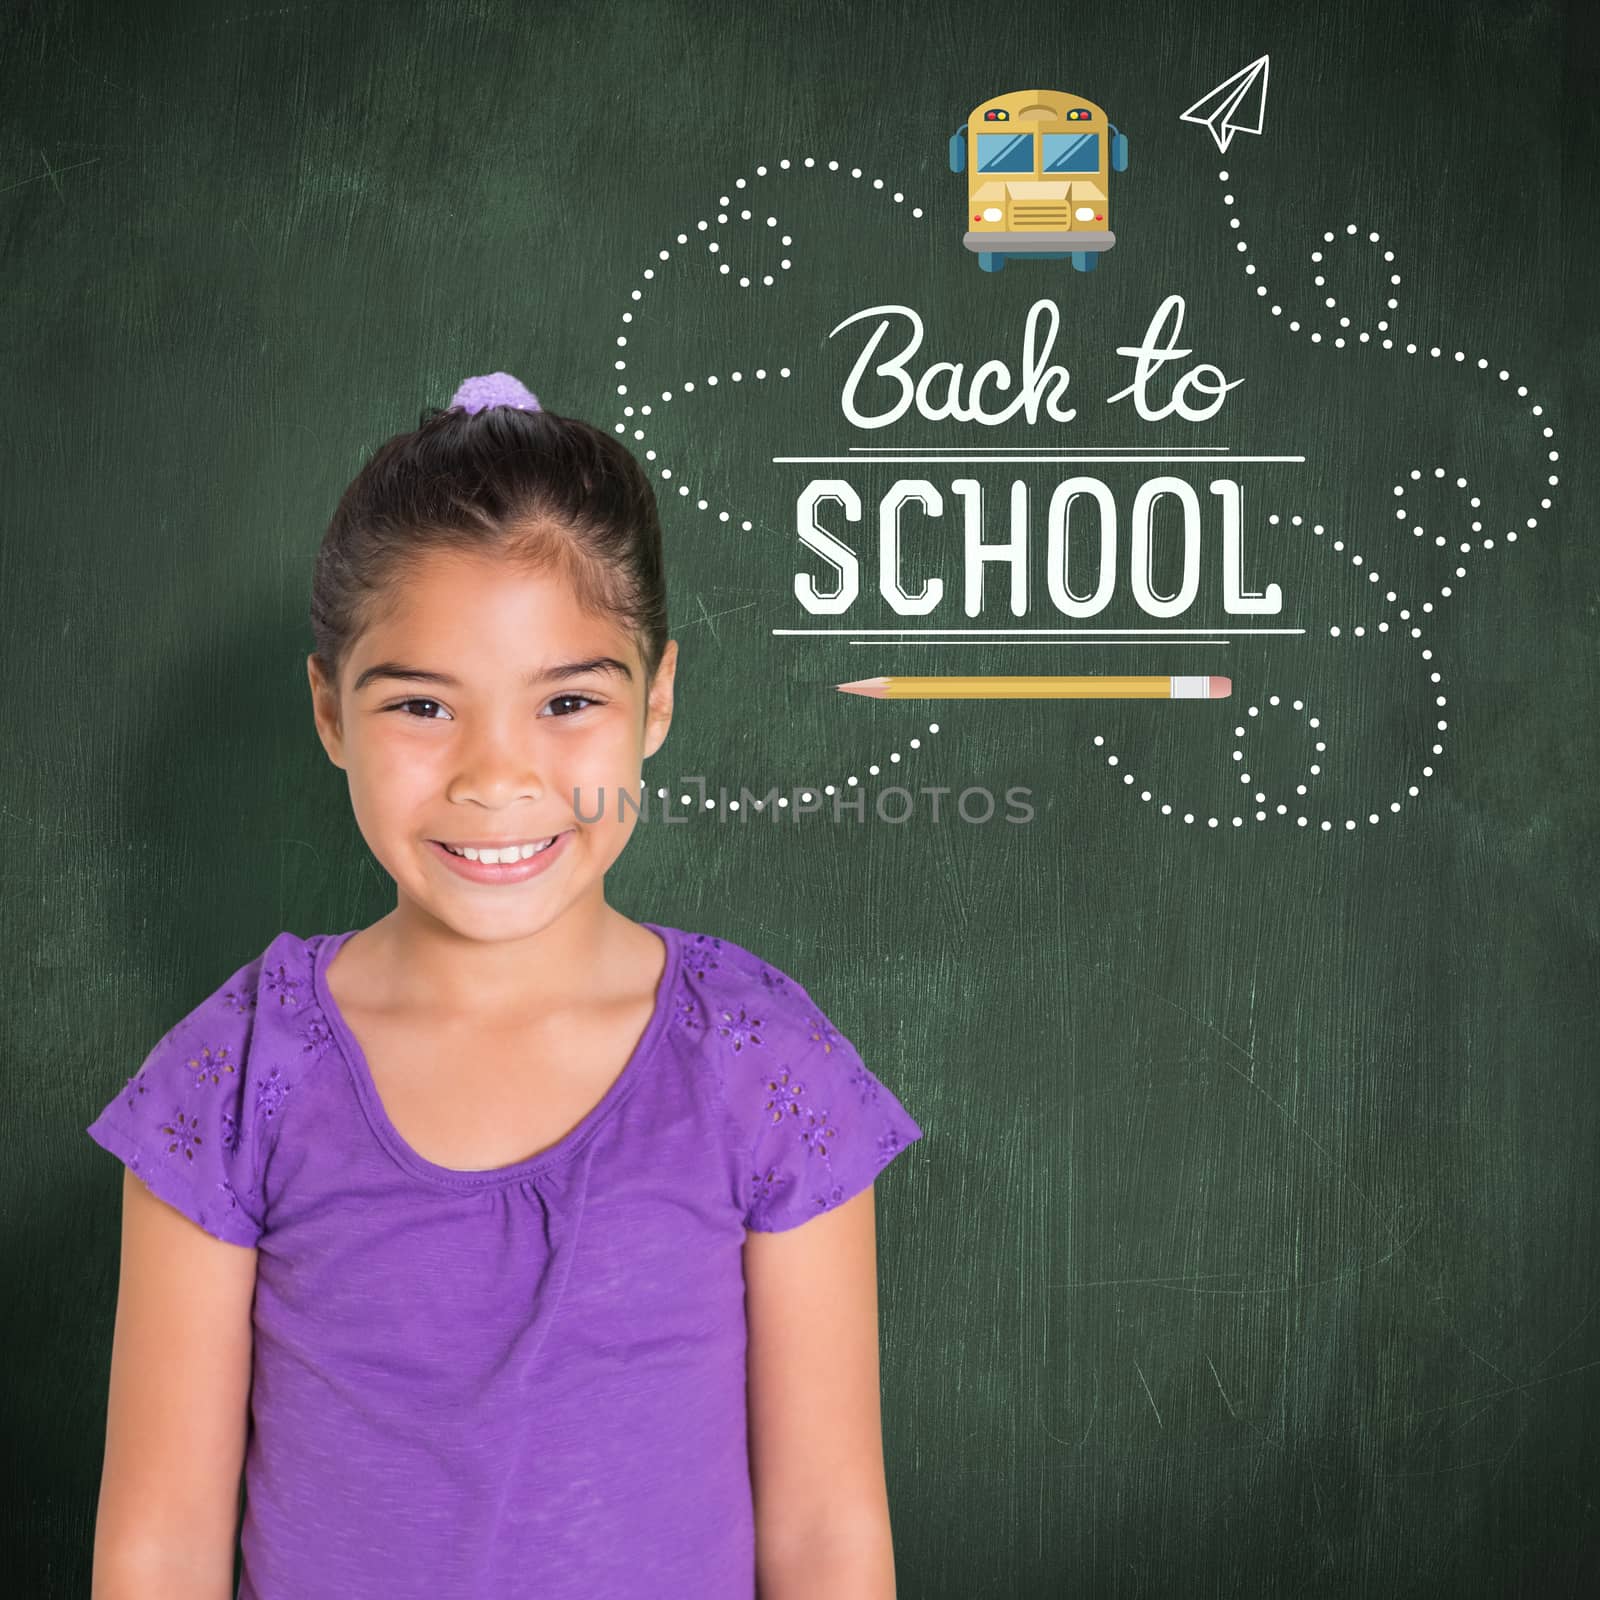 Cute girl smiling at camera against green chalkboard